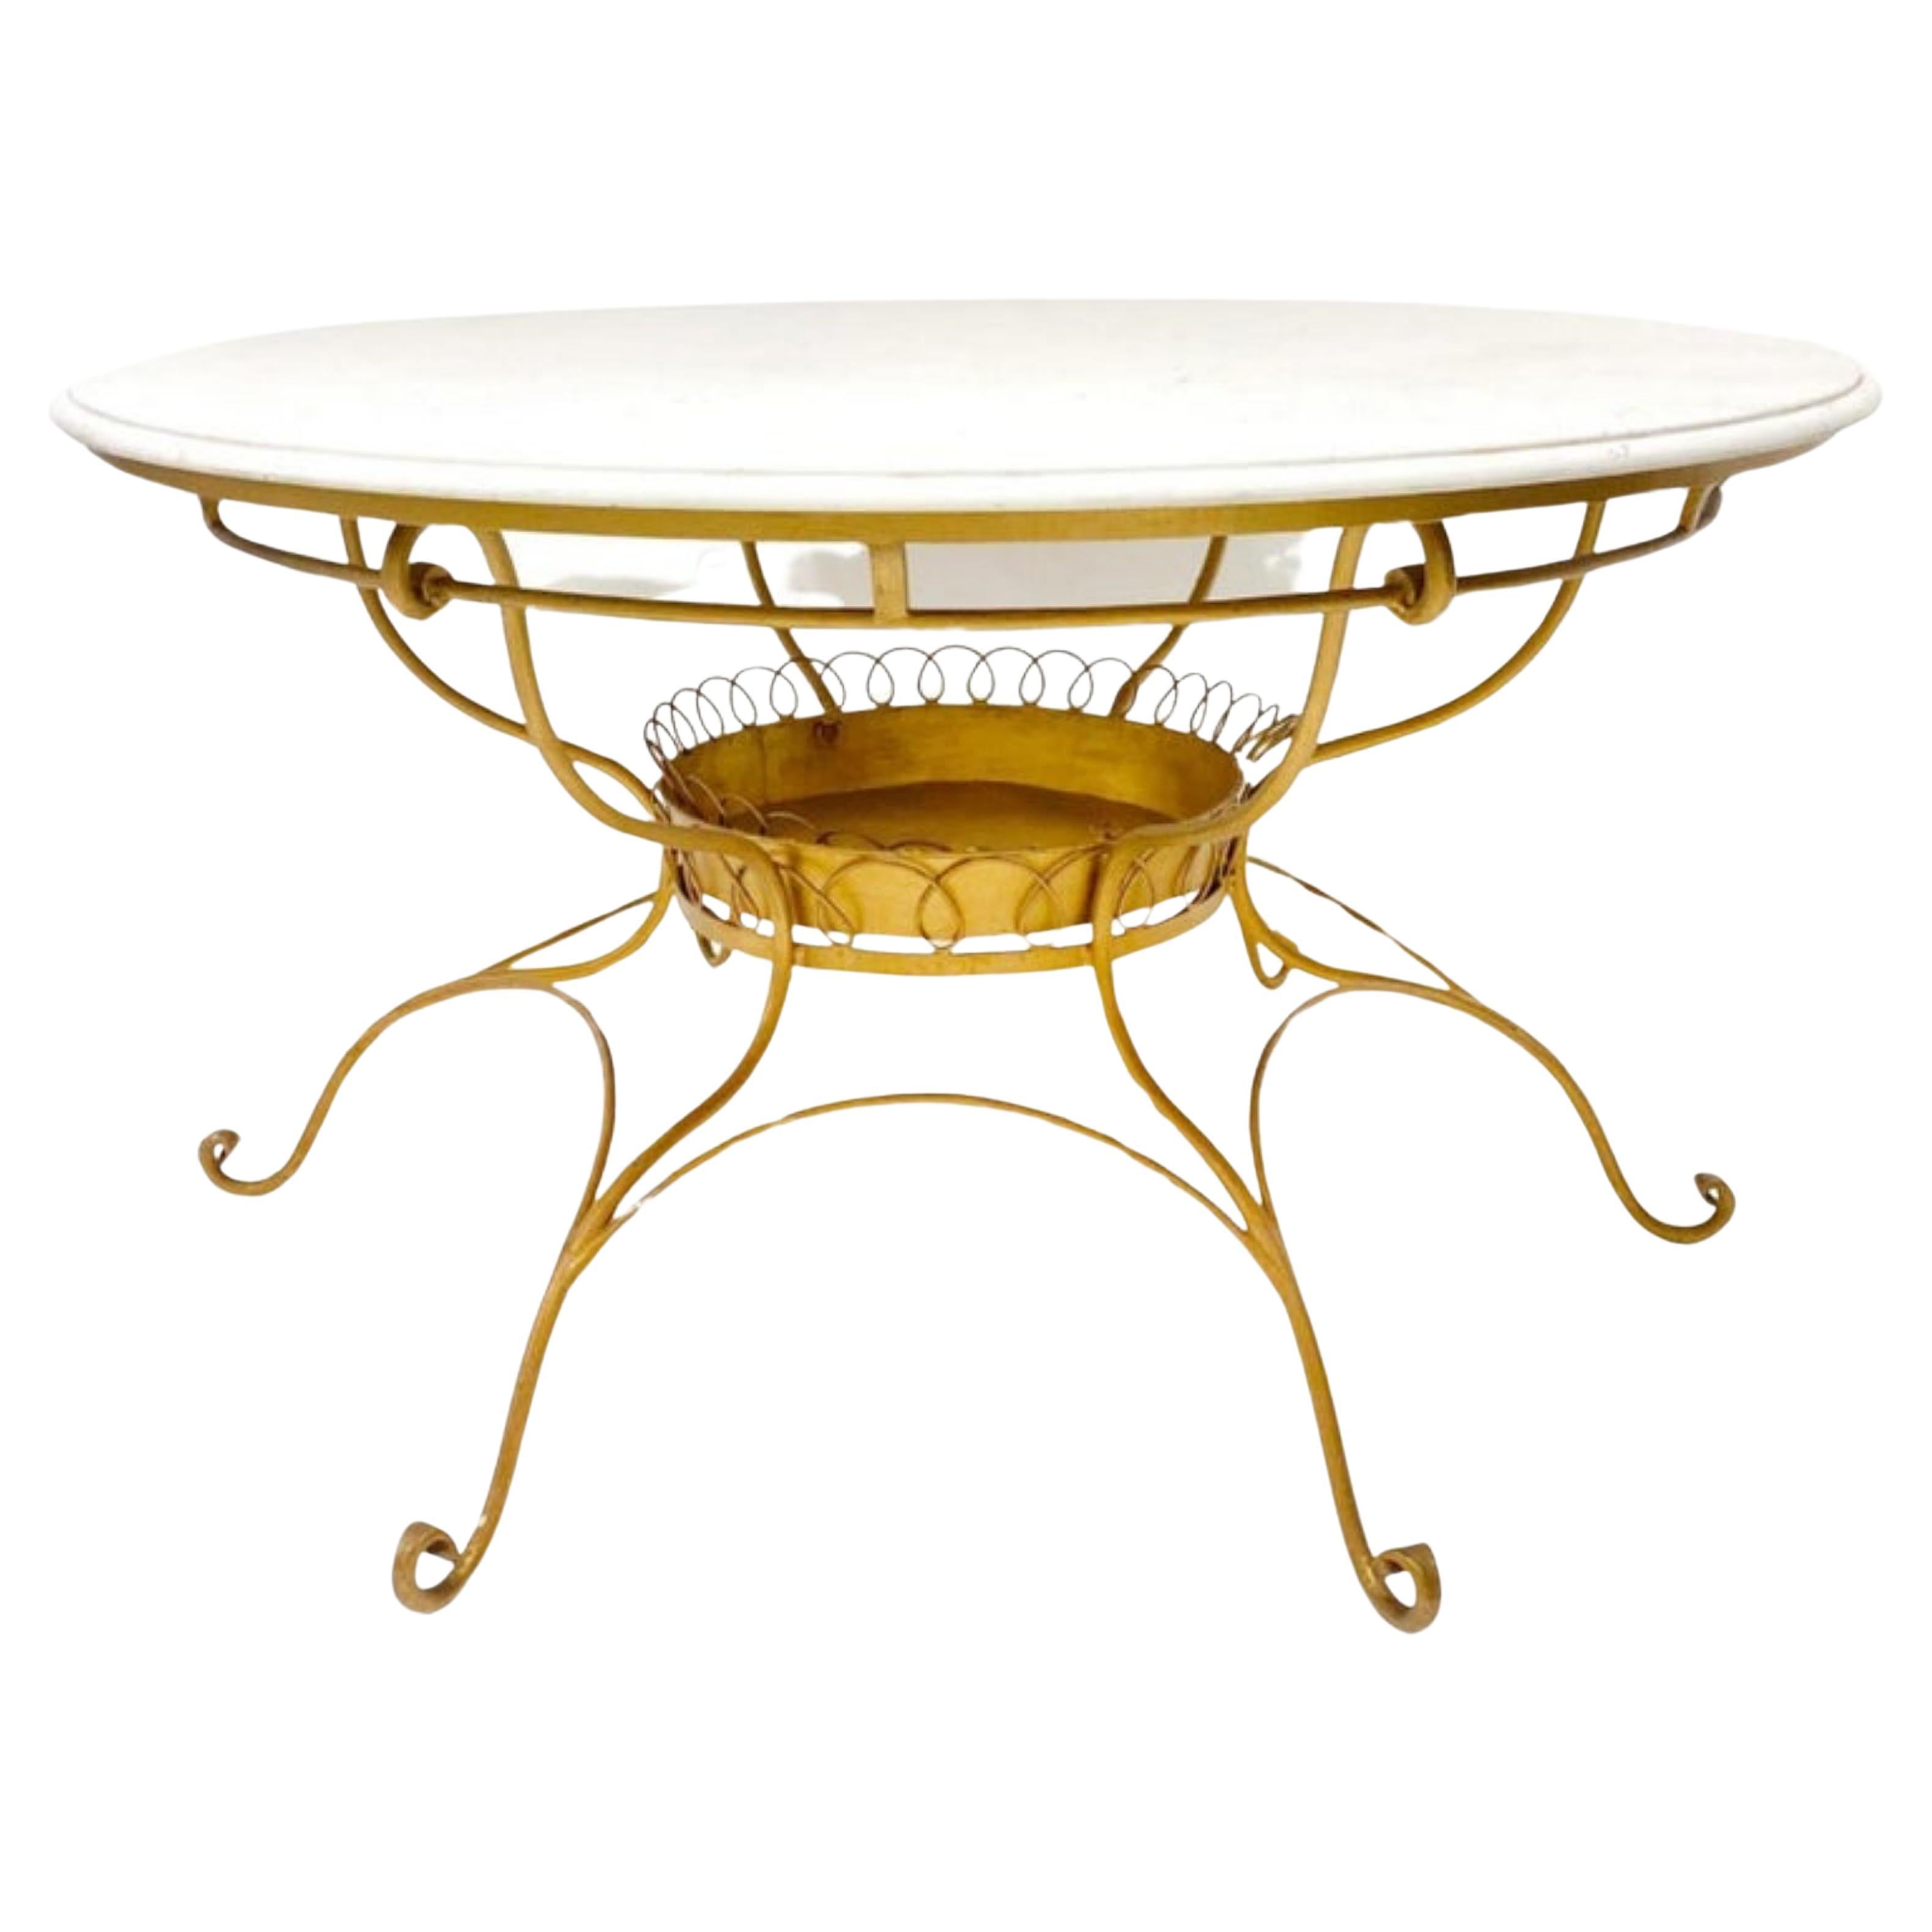 Italian Round Table with White Marble Top, 20th Century